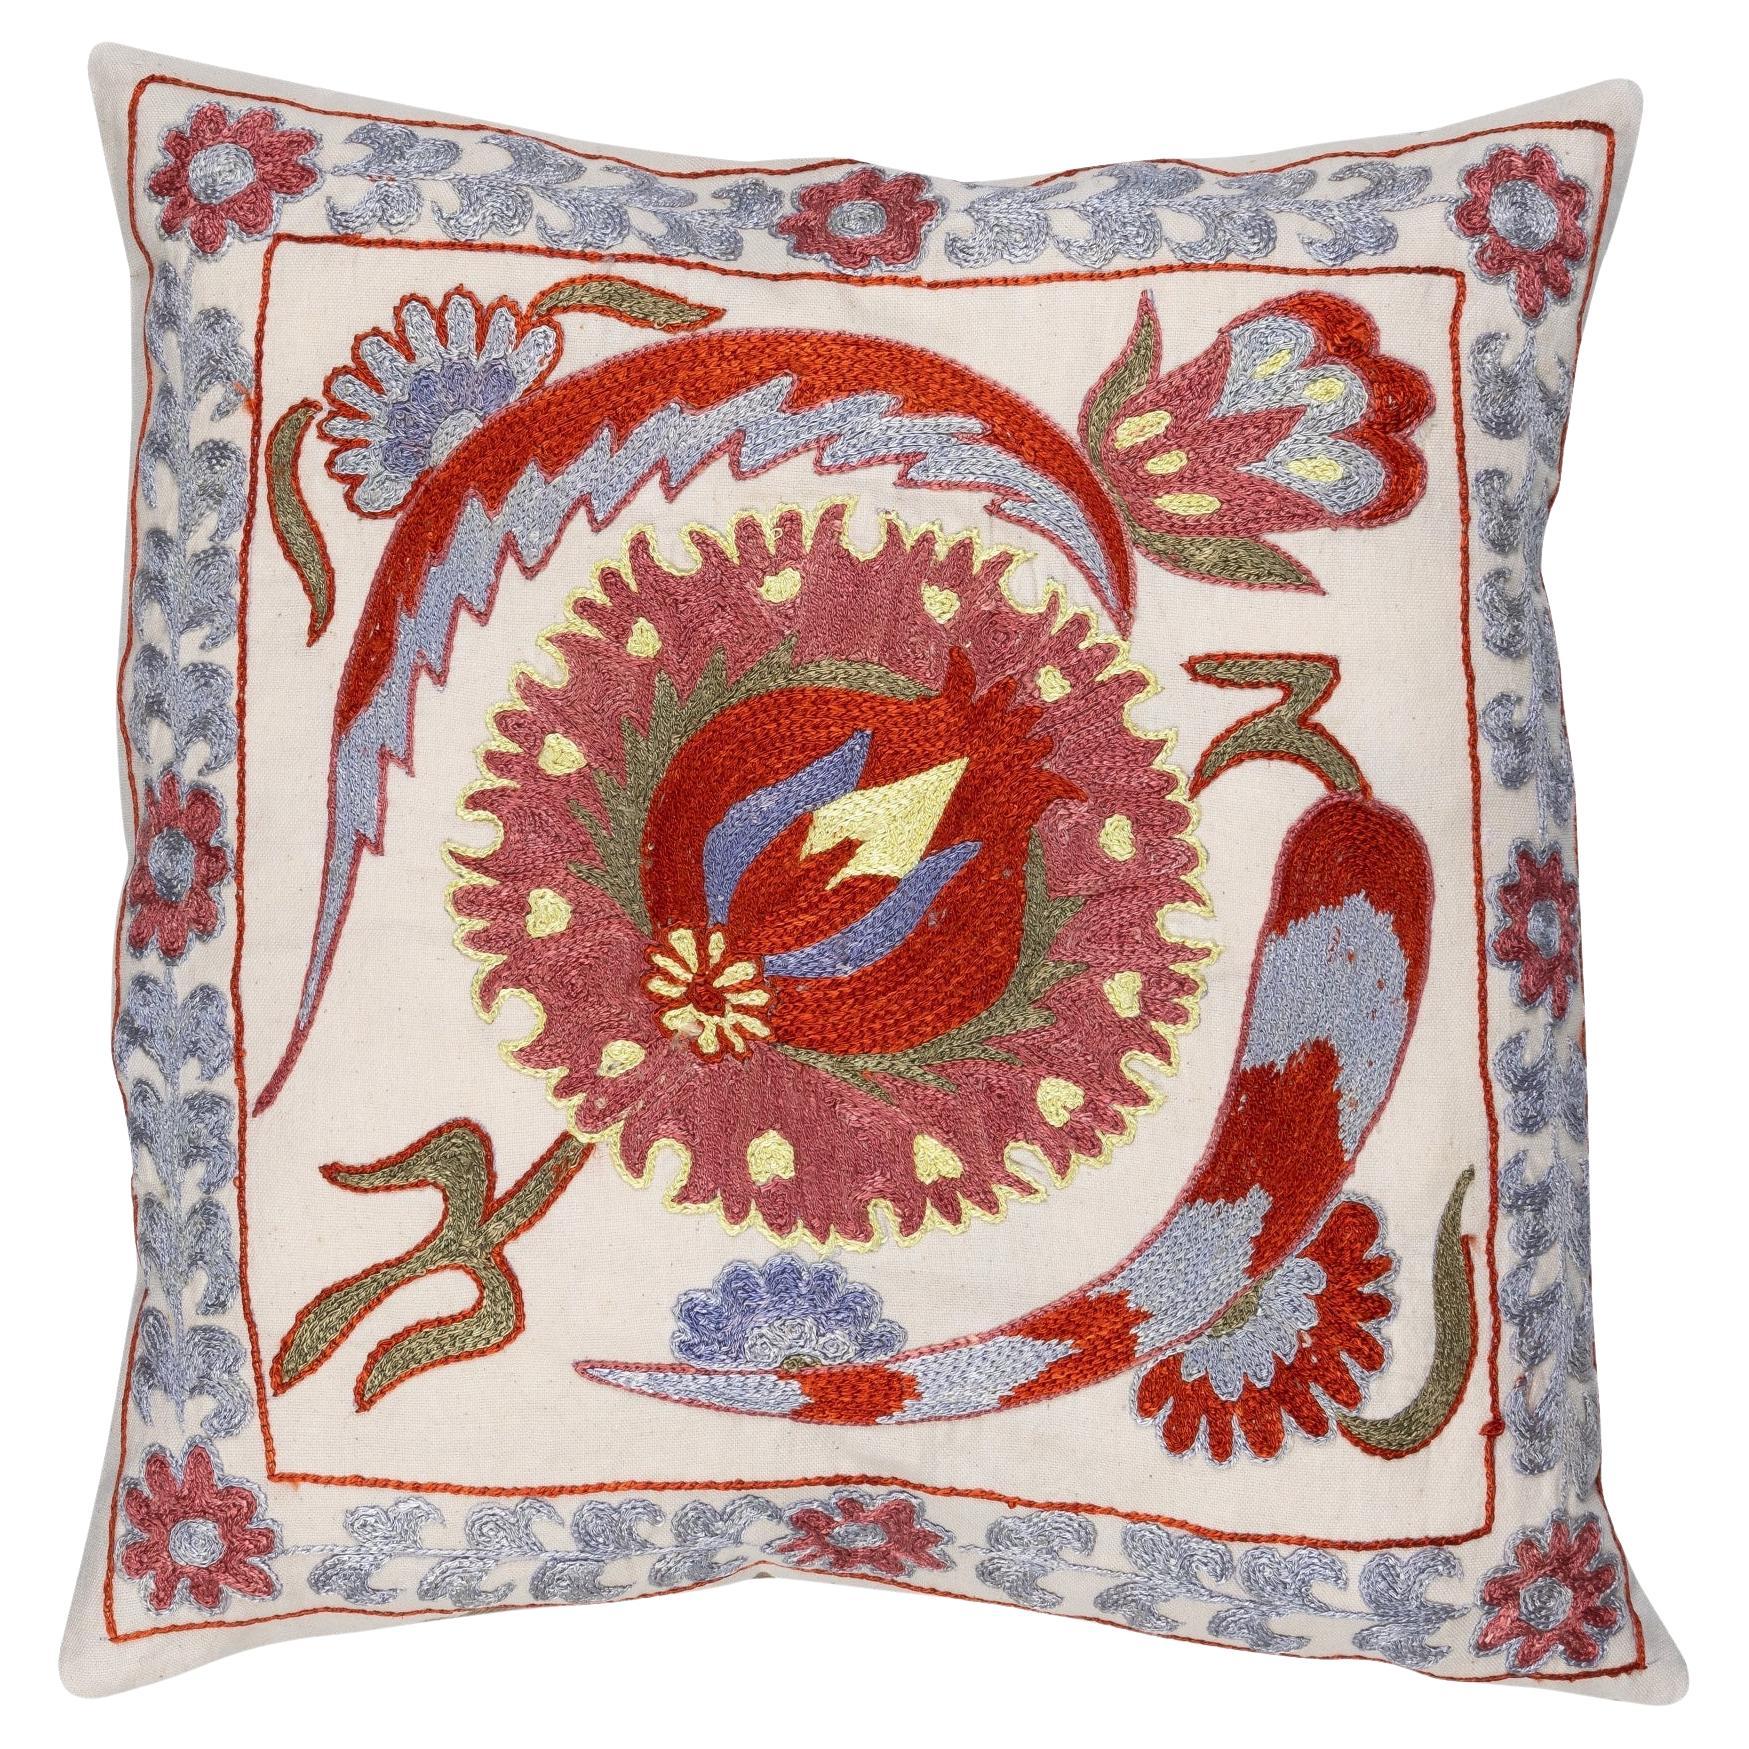 17"x17" New Silk Embroidery Suzani Cushion Cover, Fantastic Throw Pillow Cover For Sale